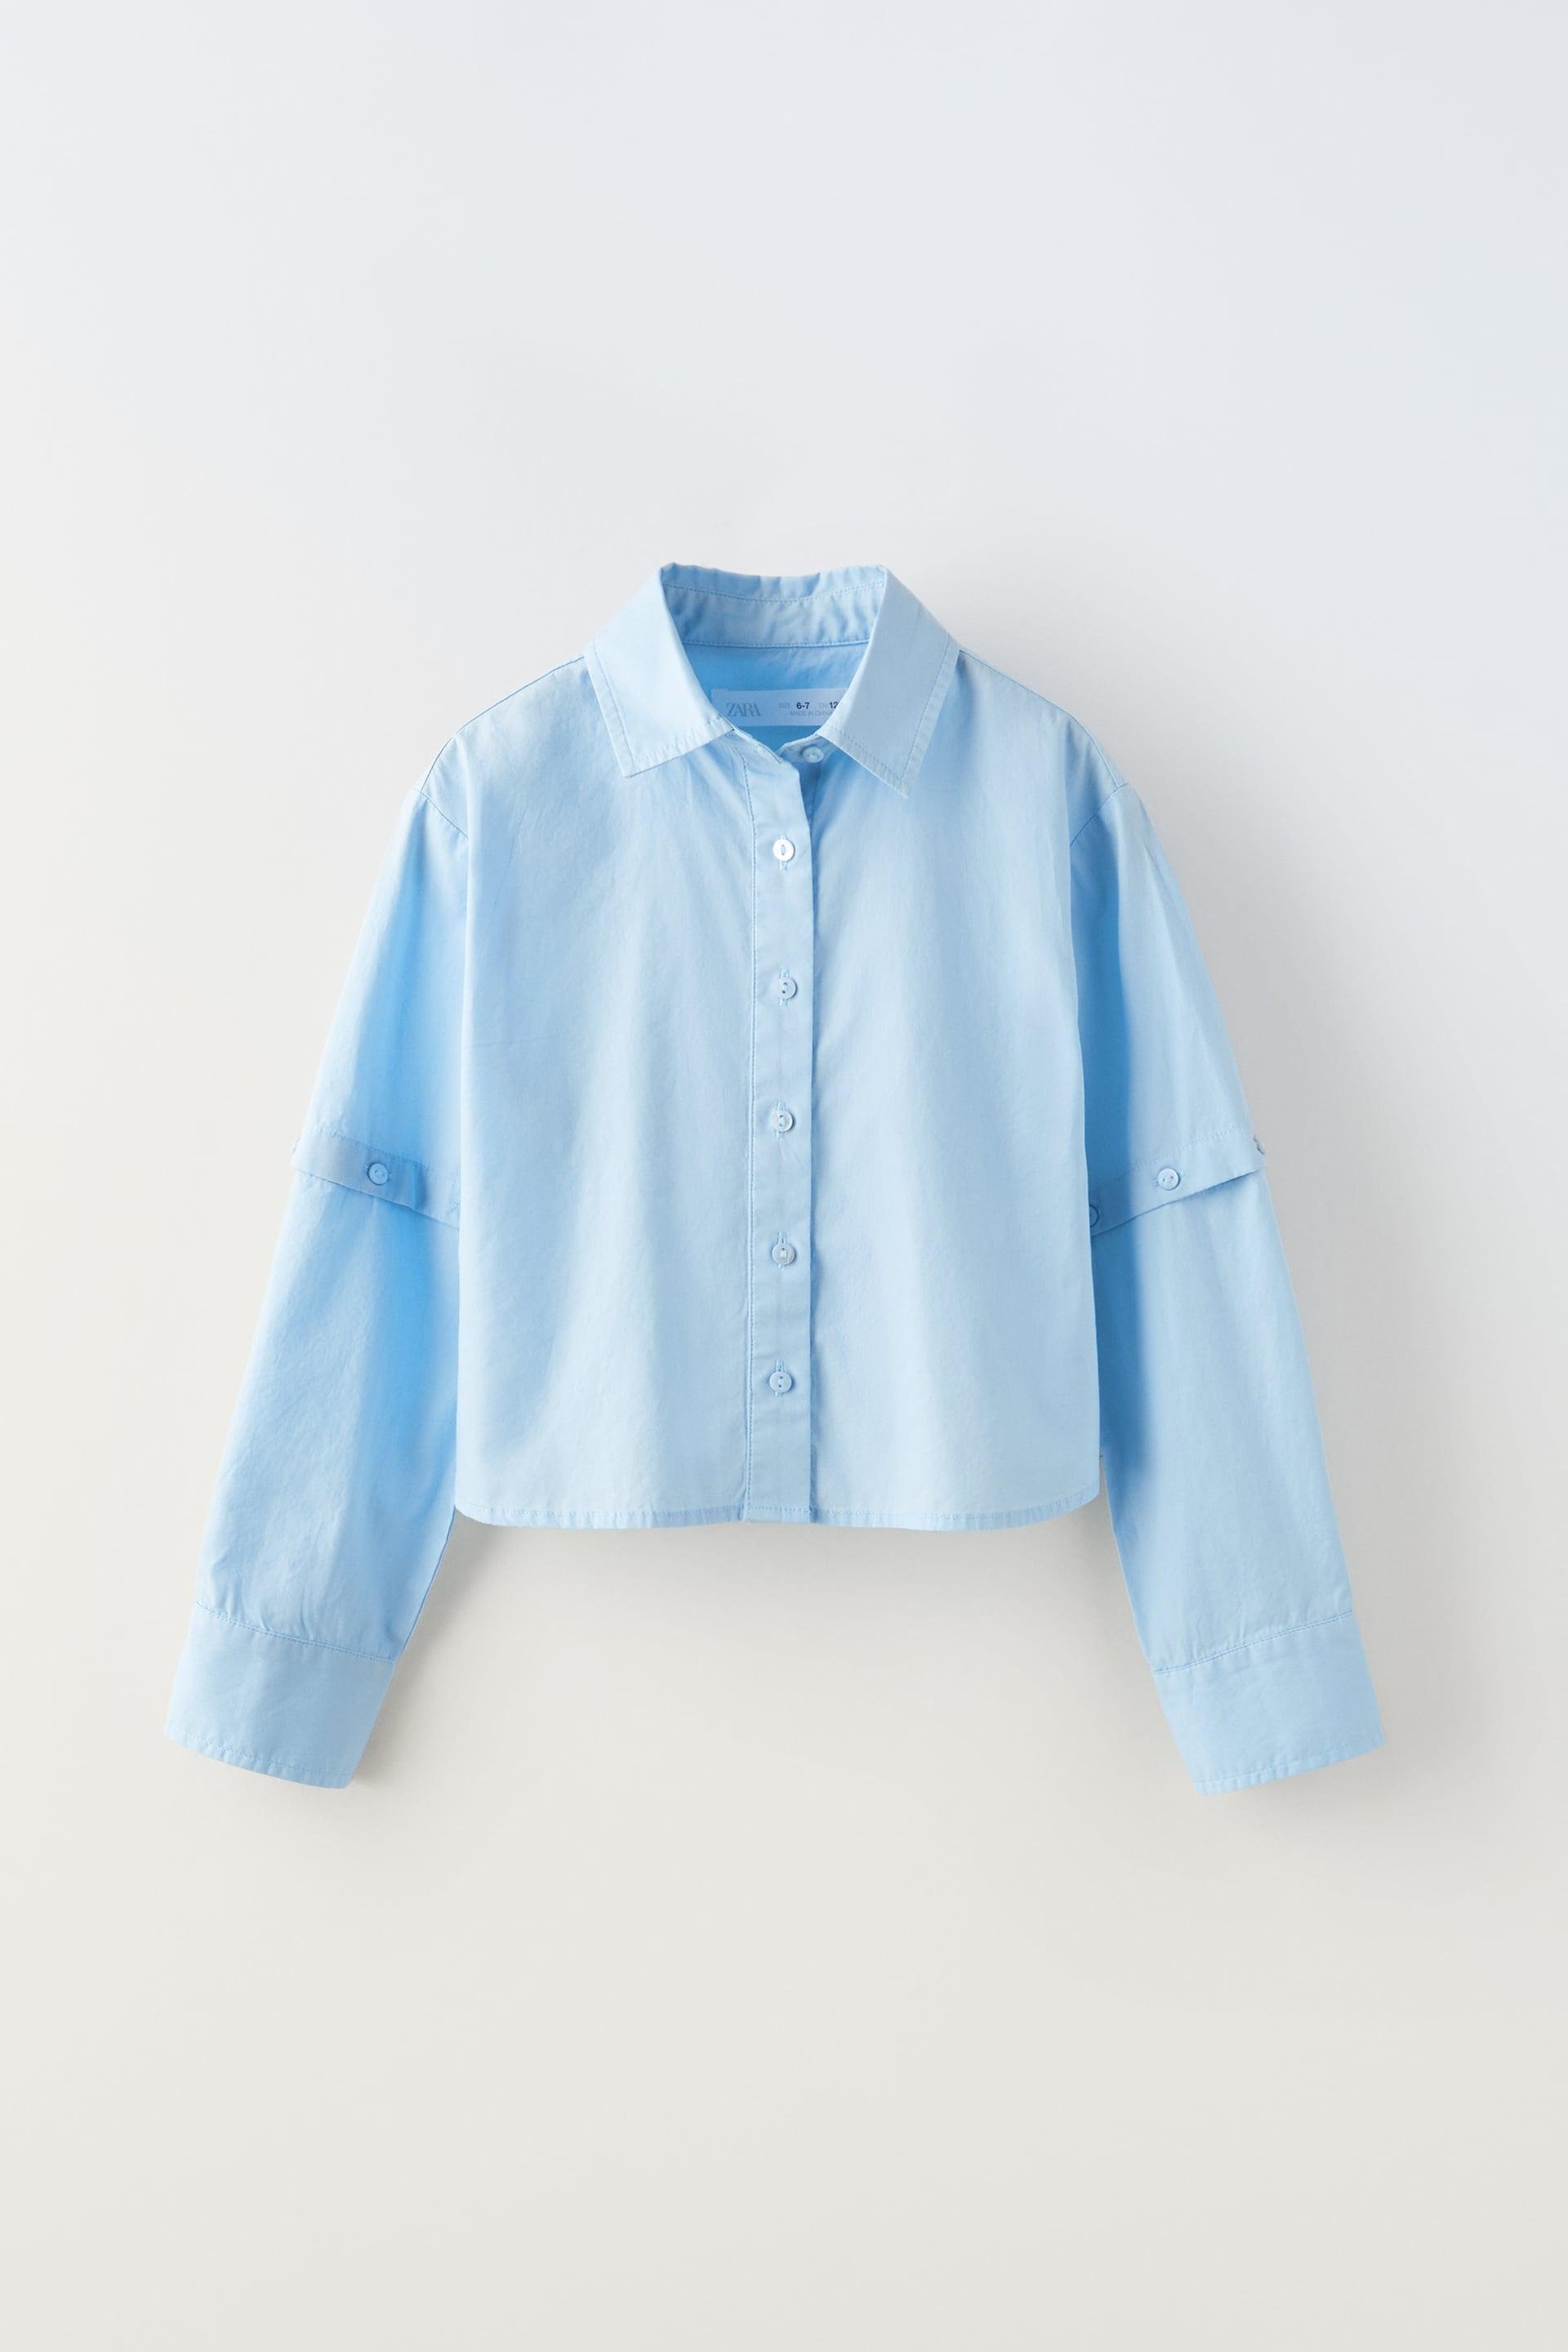 REMOVABLE SLEEVE SHIRT by ZARA